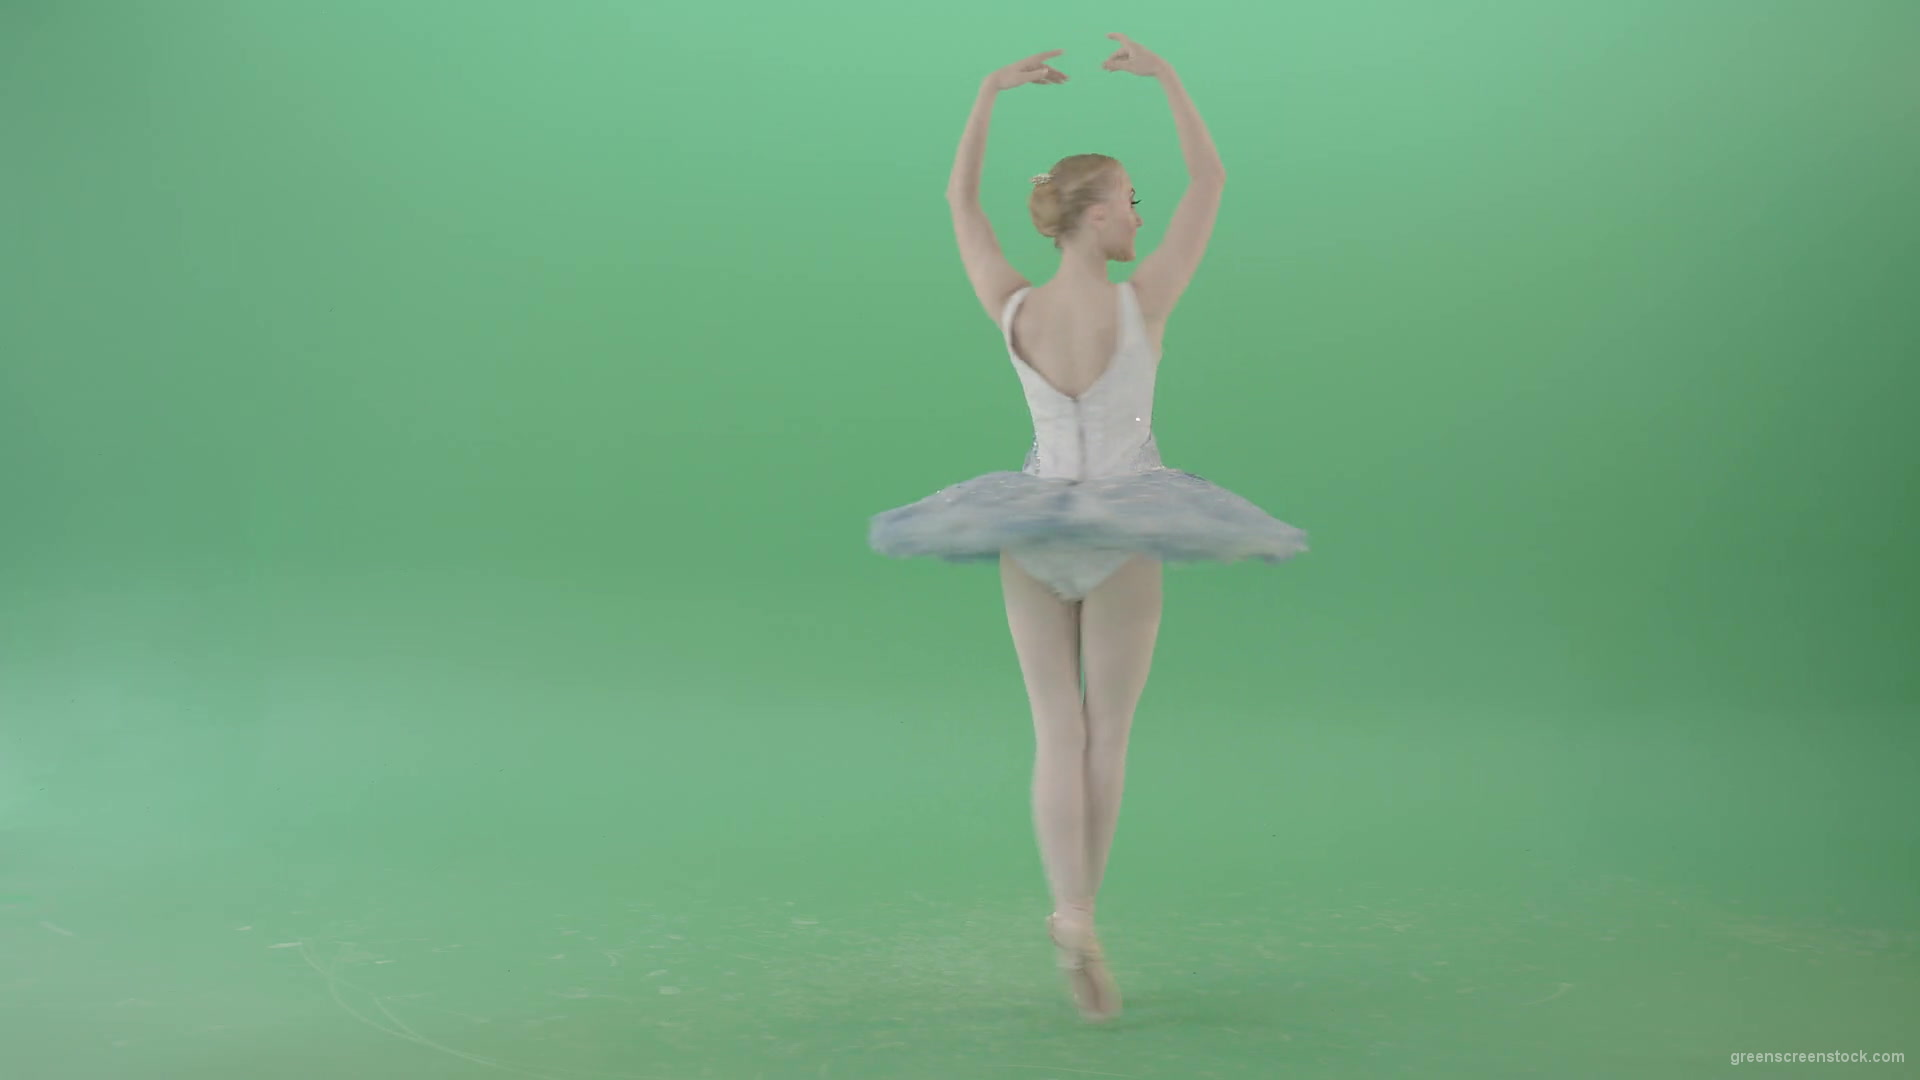 Beauty-blonde-girl-with-happy-smile-spinning-in-ballet-dress-over-green-screen-4K-Video-Footage-1920_007 Green Screen Stock